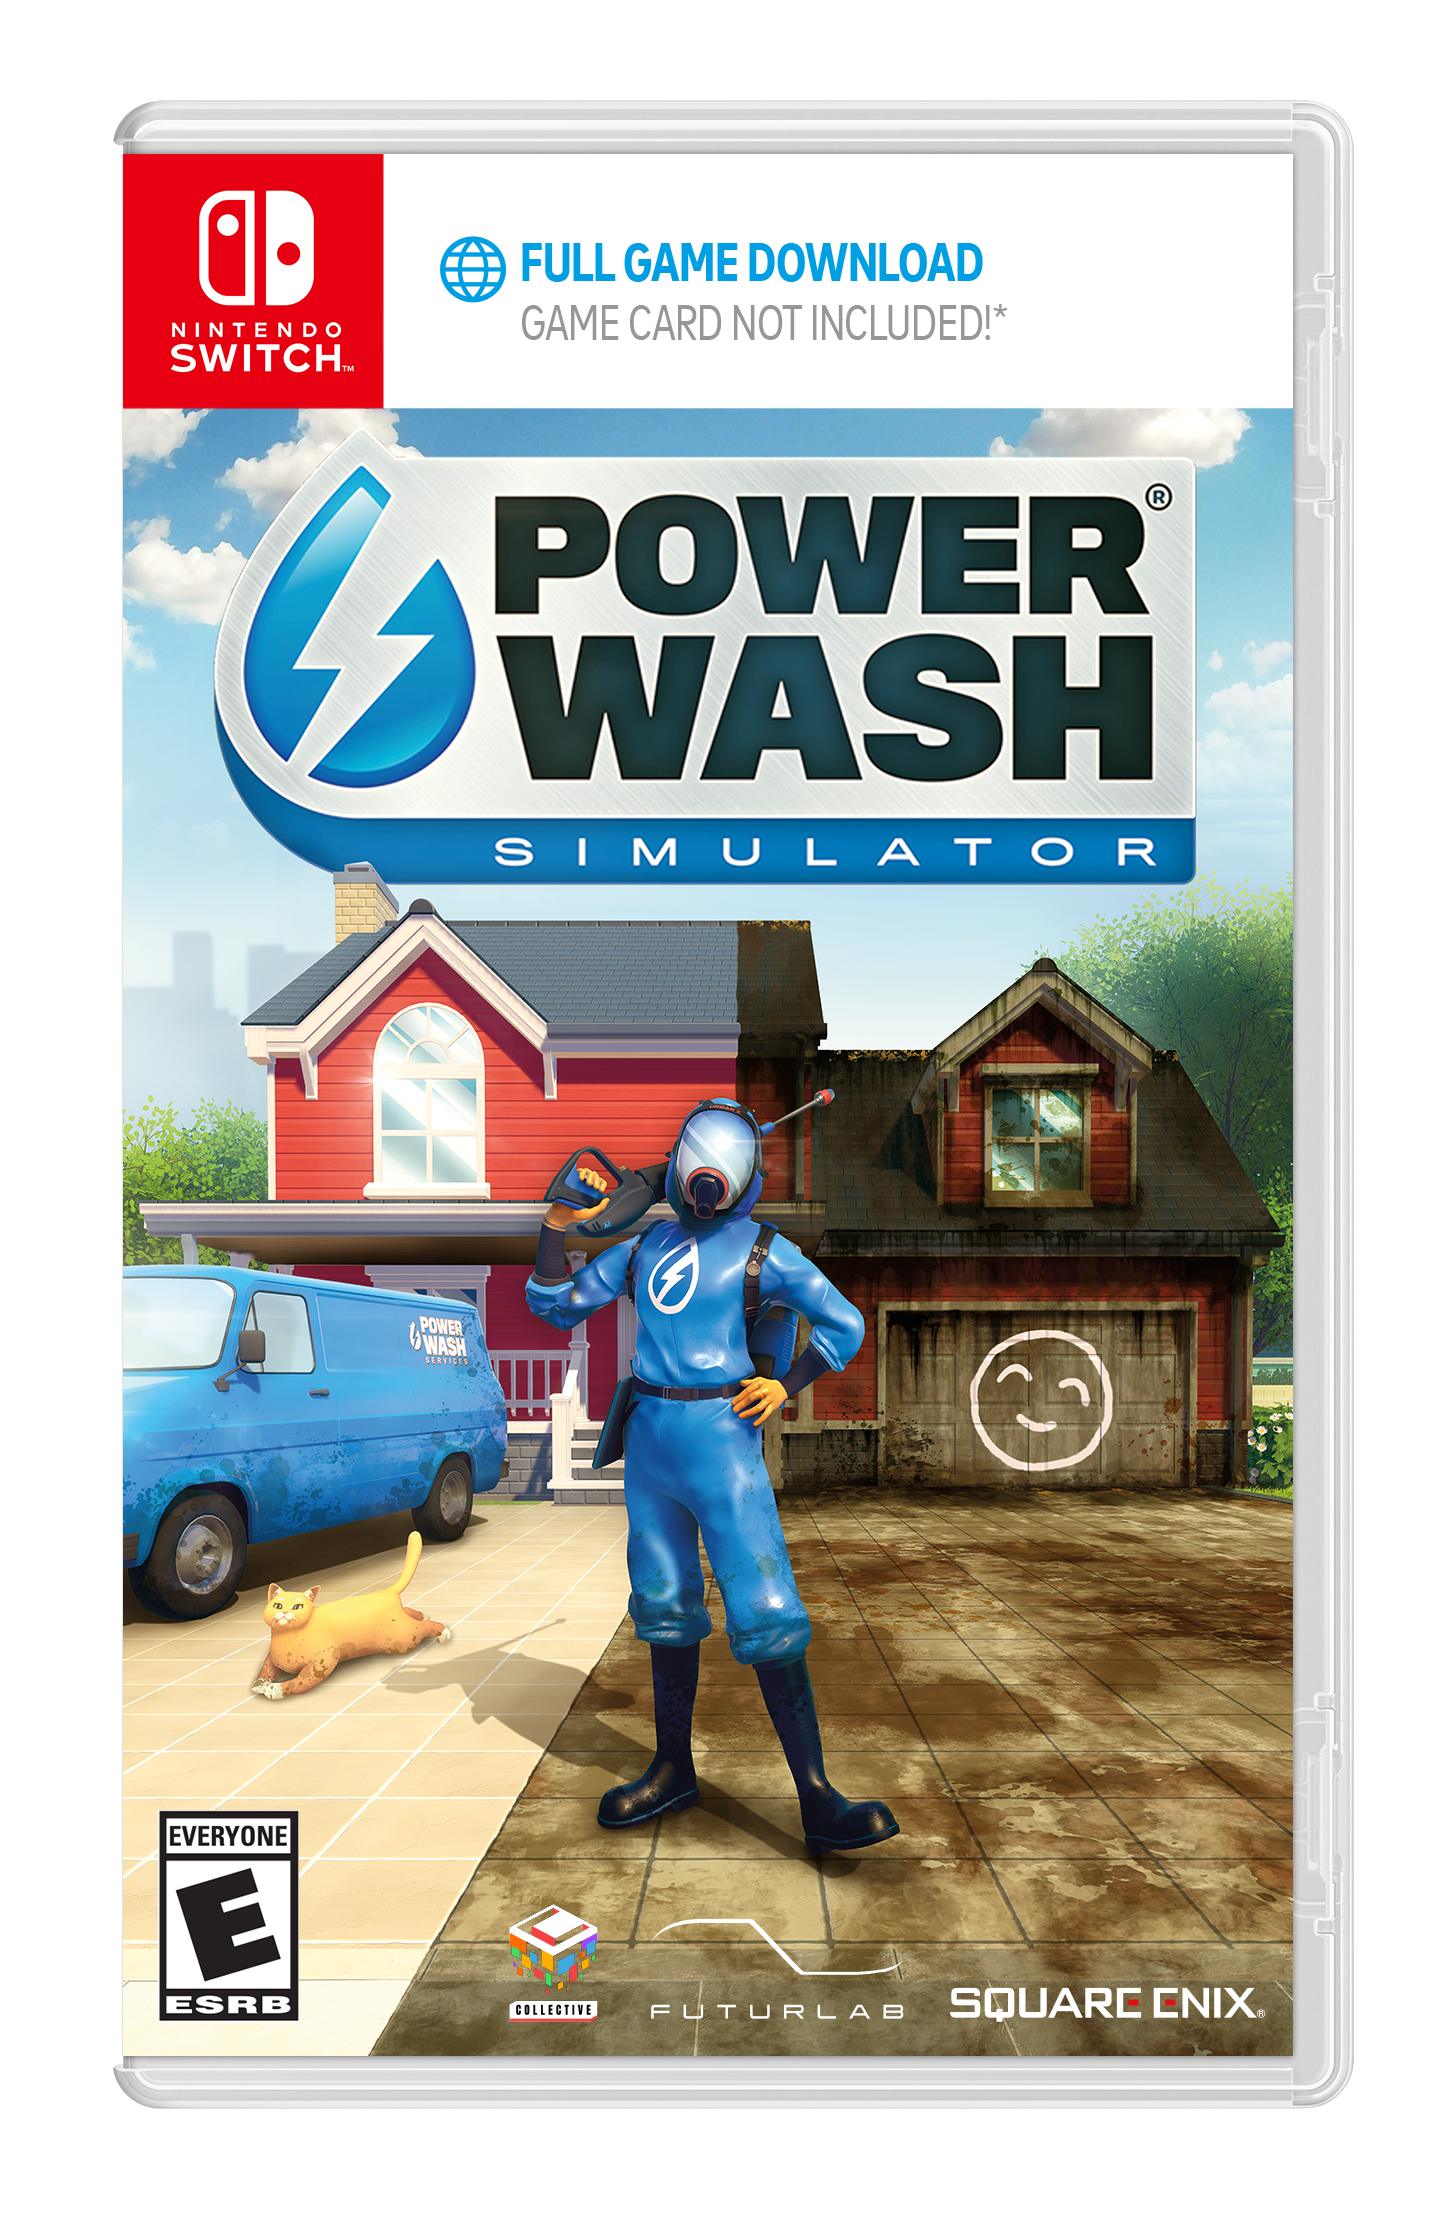 Download and play Power Wash Smart Wash Simulator Game 2021 on PC